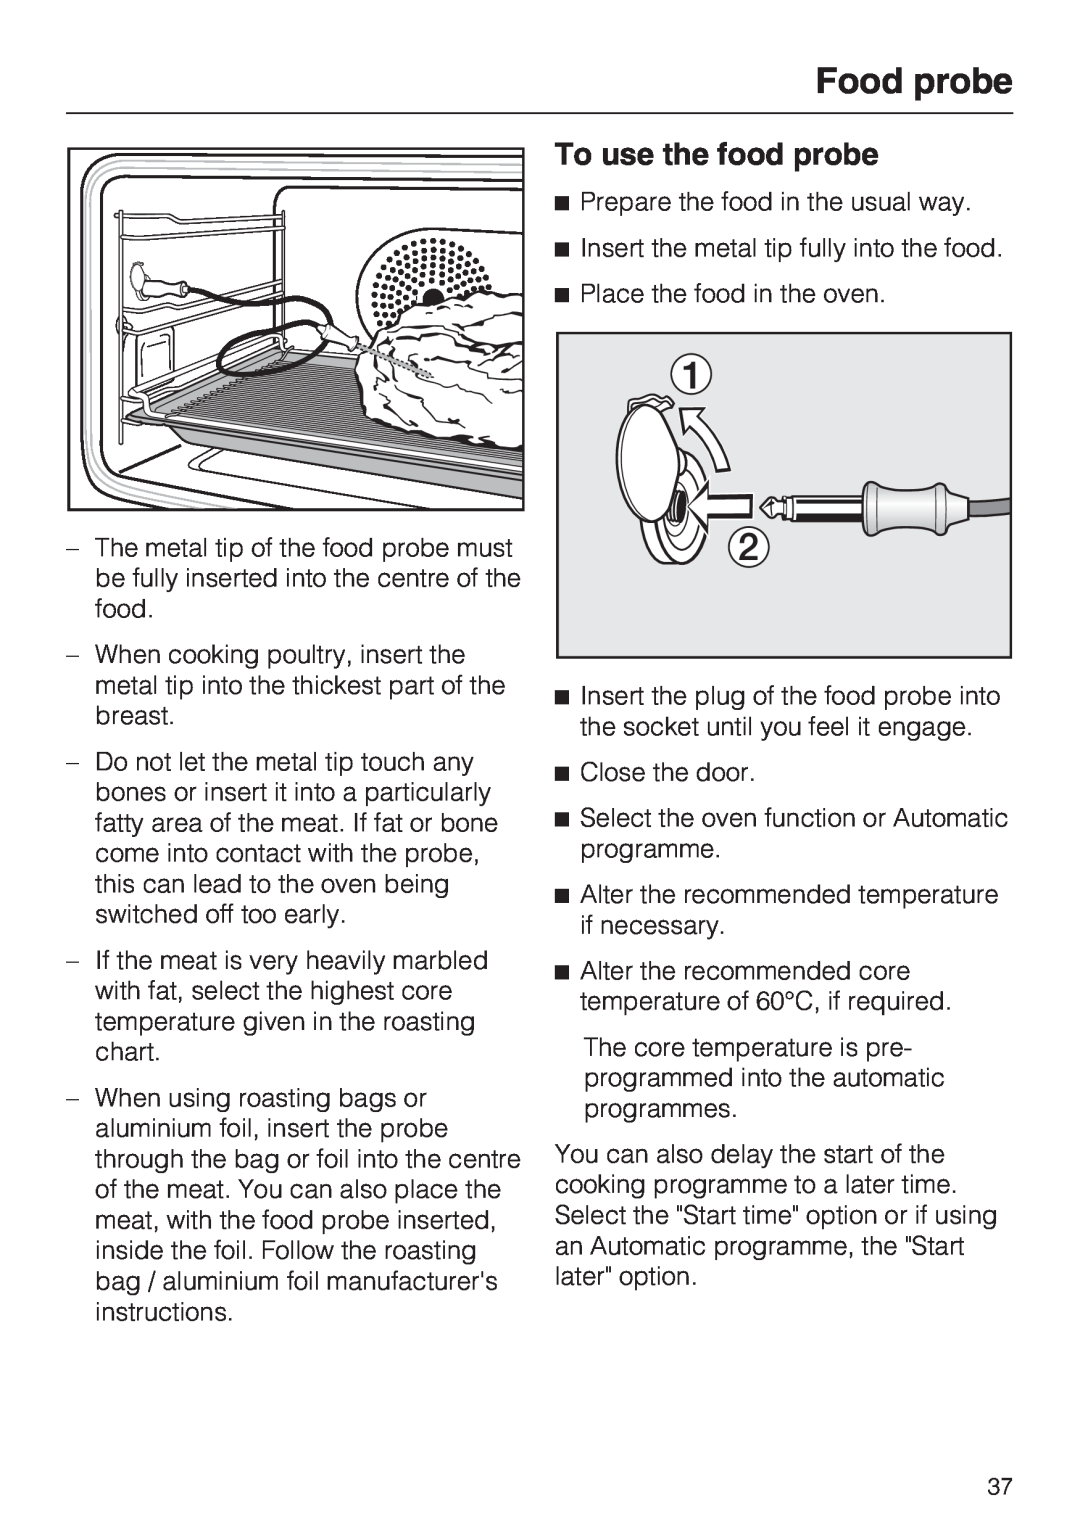 Miele H 5961 B installation instructions To use the food probe, Food probe 